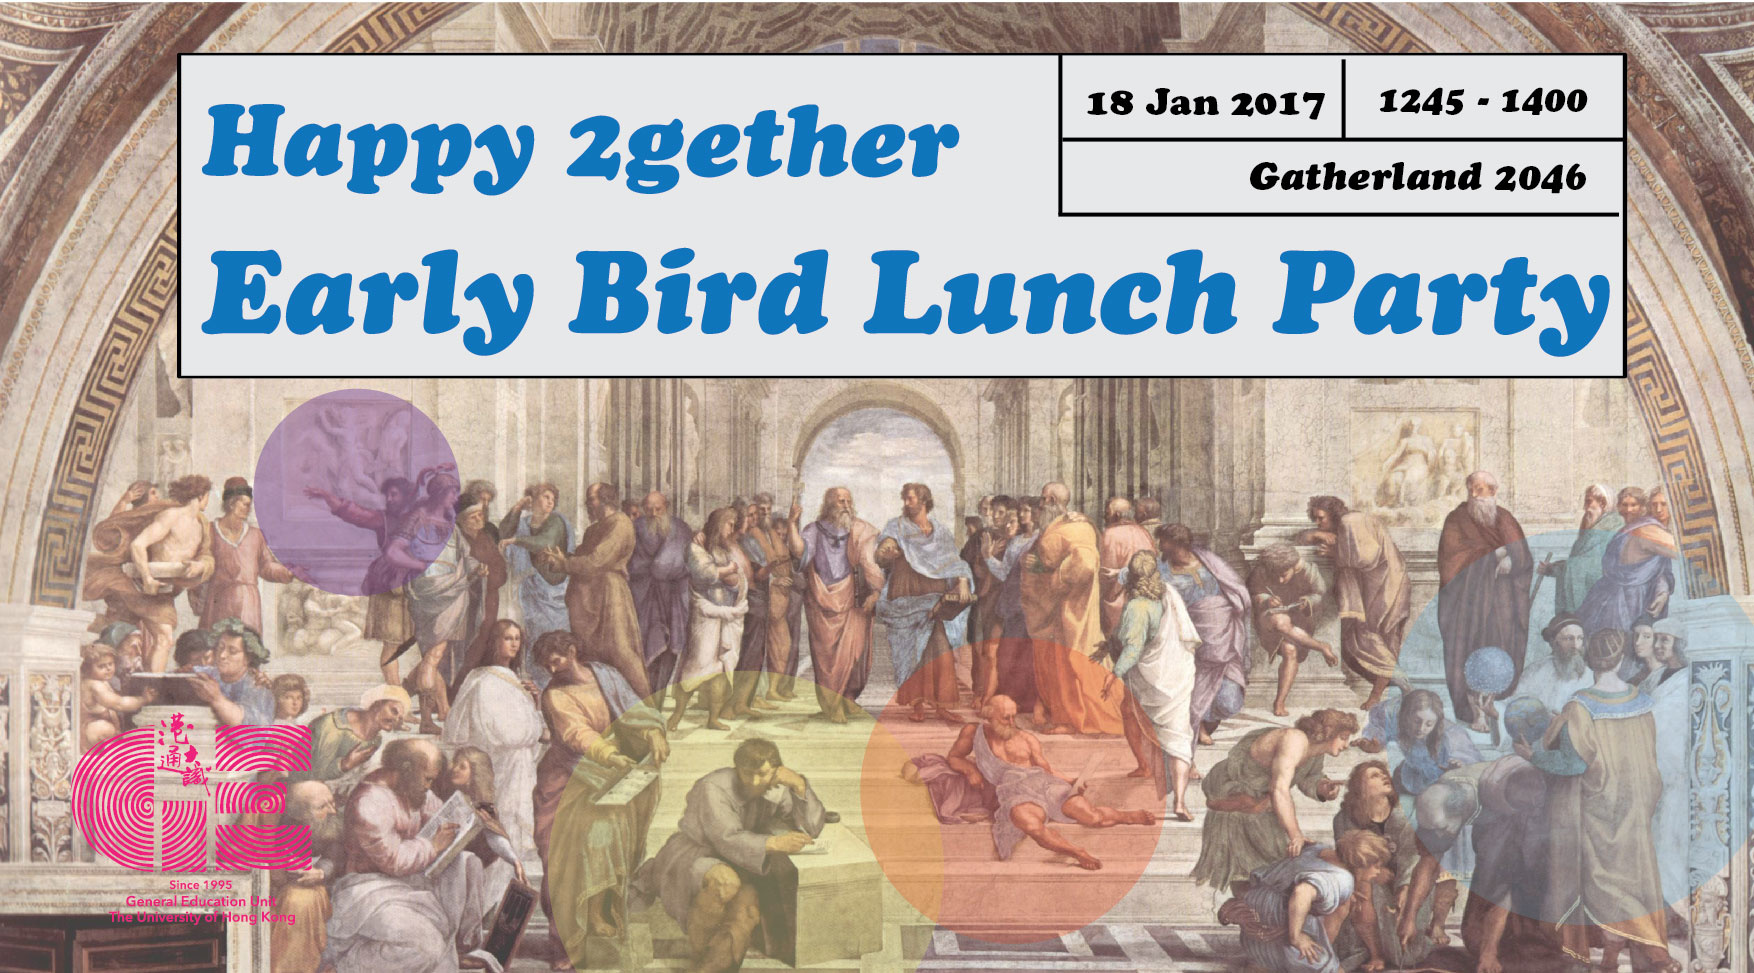 GE Happy 2gether & Early Bird Lunch Party